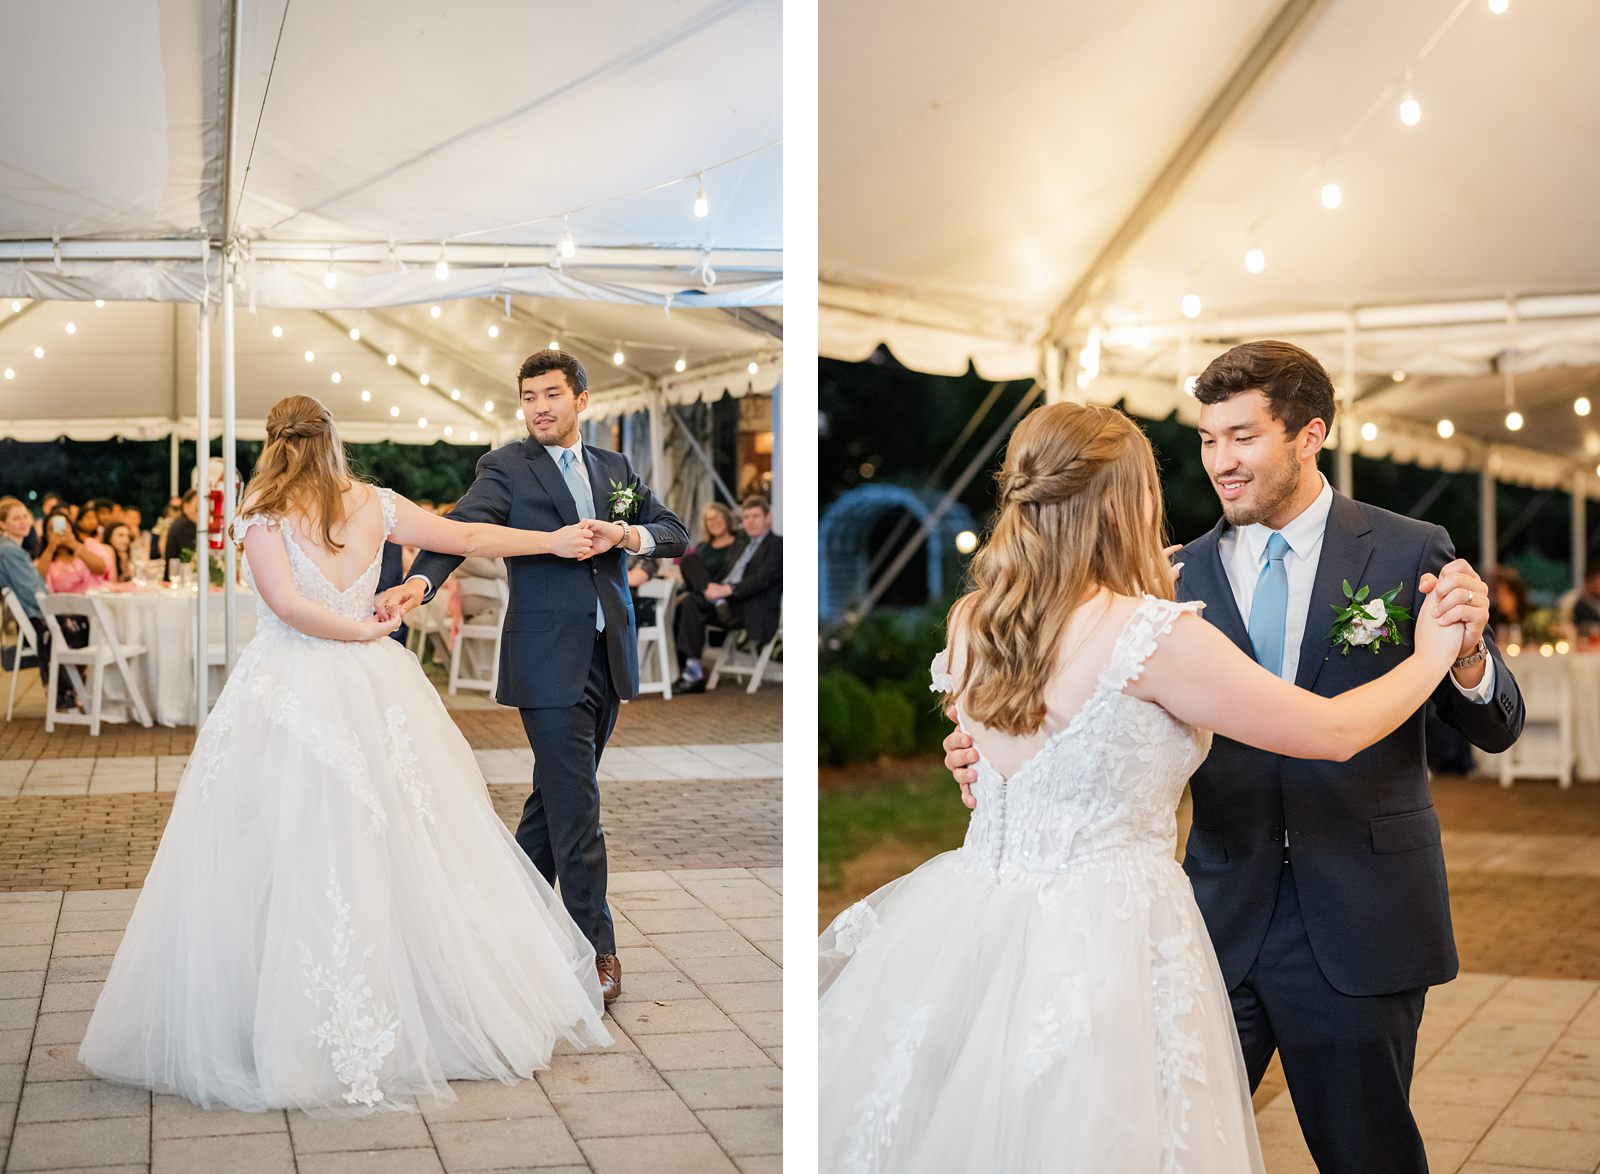 Bride and Groom Dancing at Fall Lewis Ginter Wedding Reception